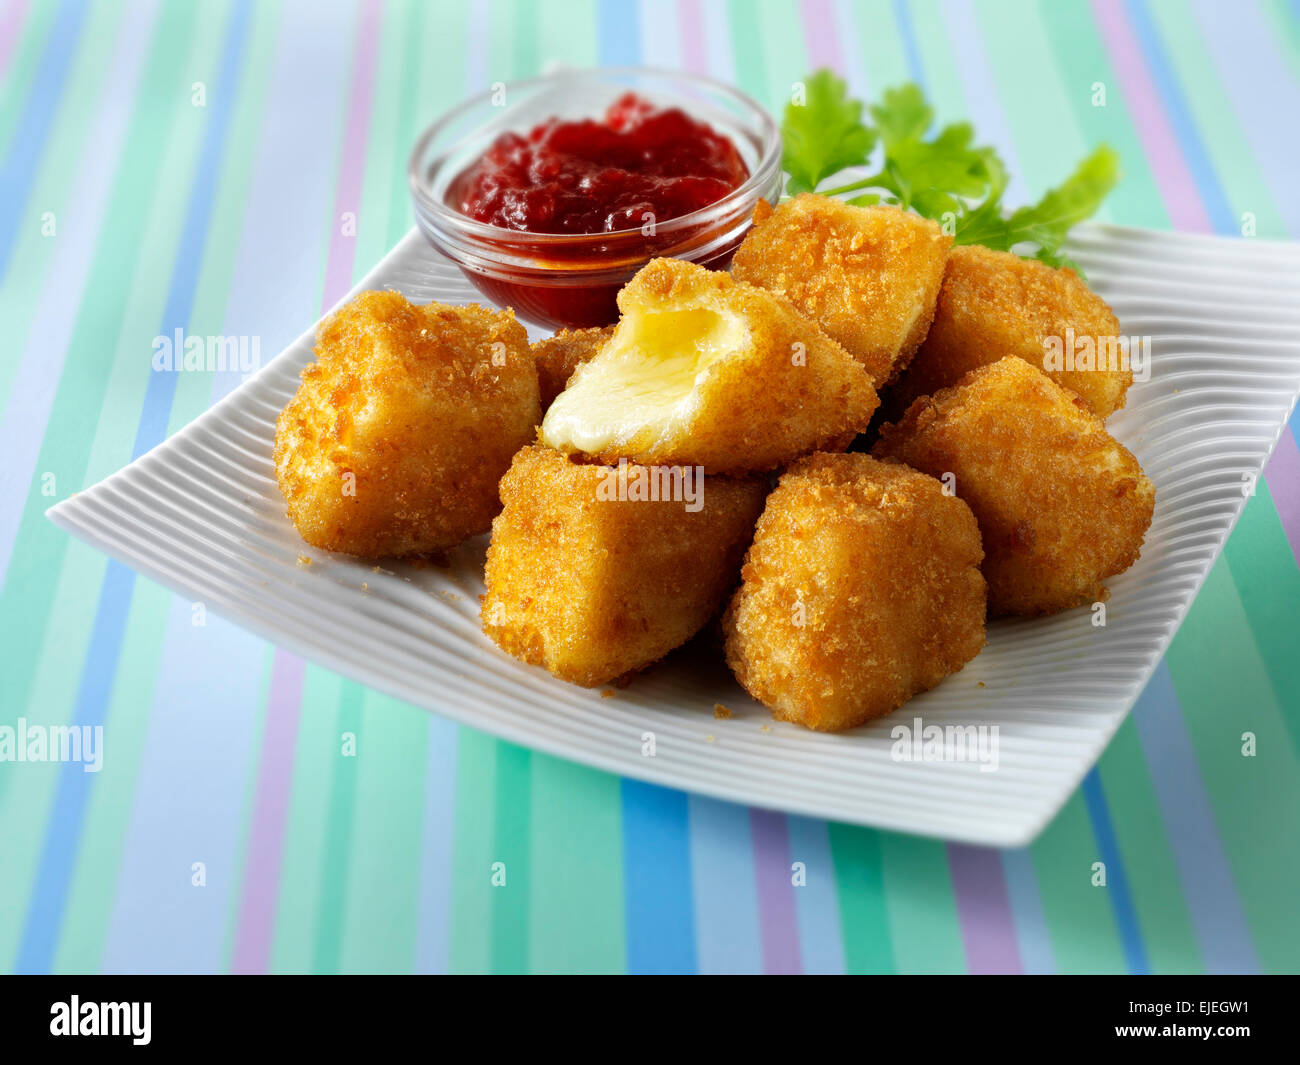 Deep fried camembert cheese in bread crumbs with salad Stock Photo